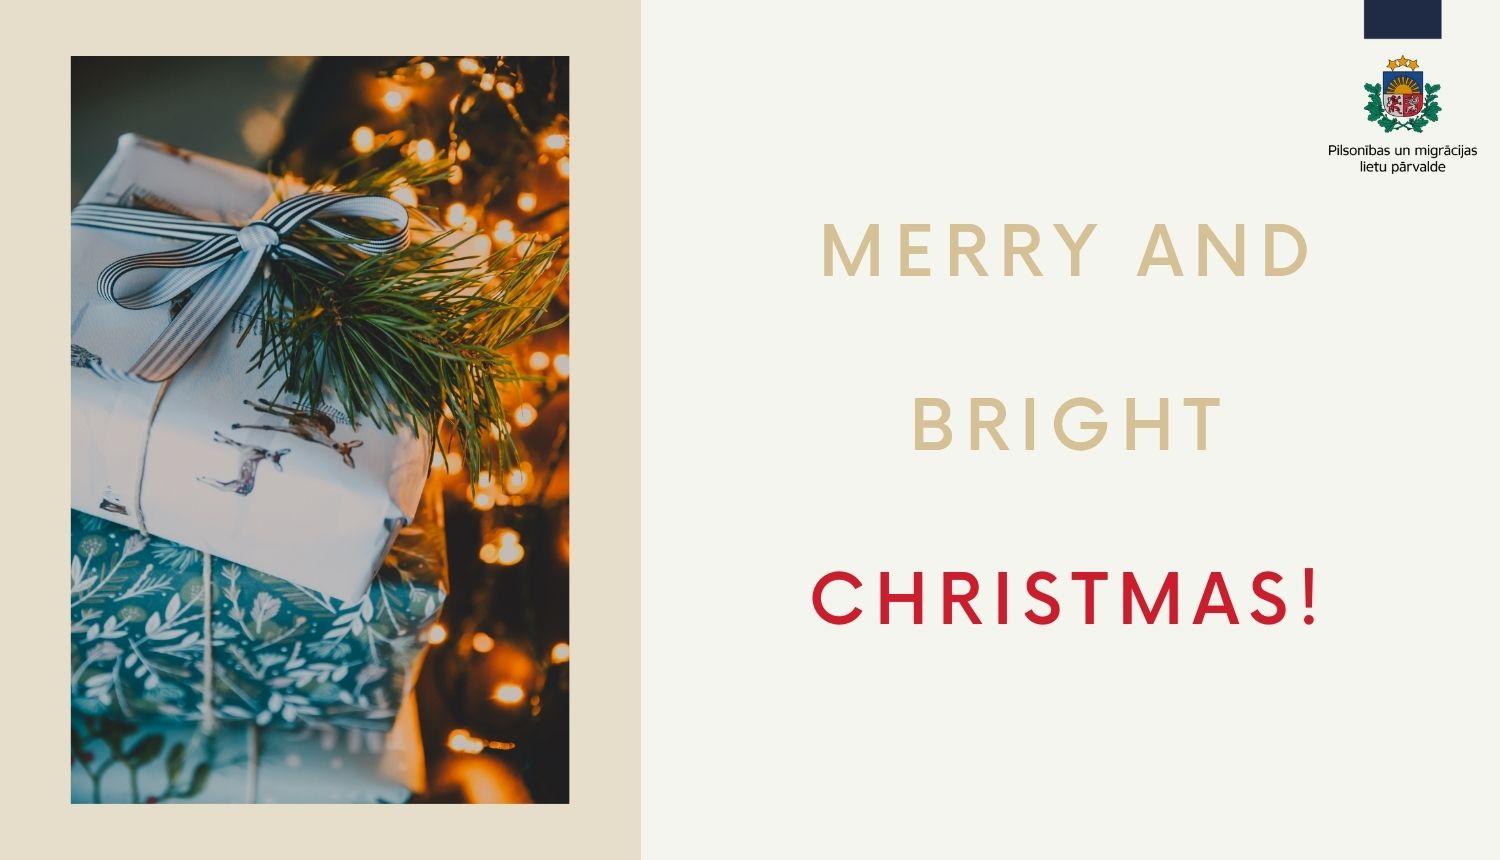 Merry and Bright Christmas!